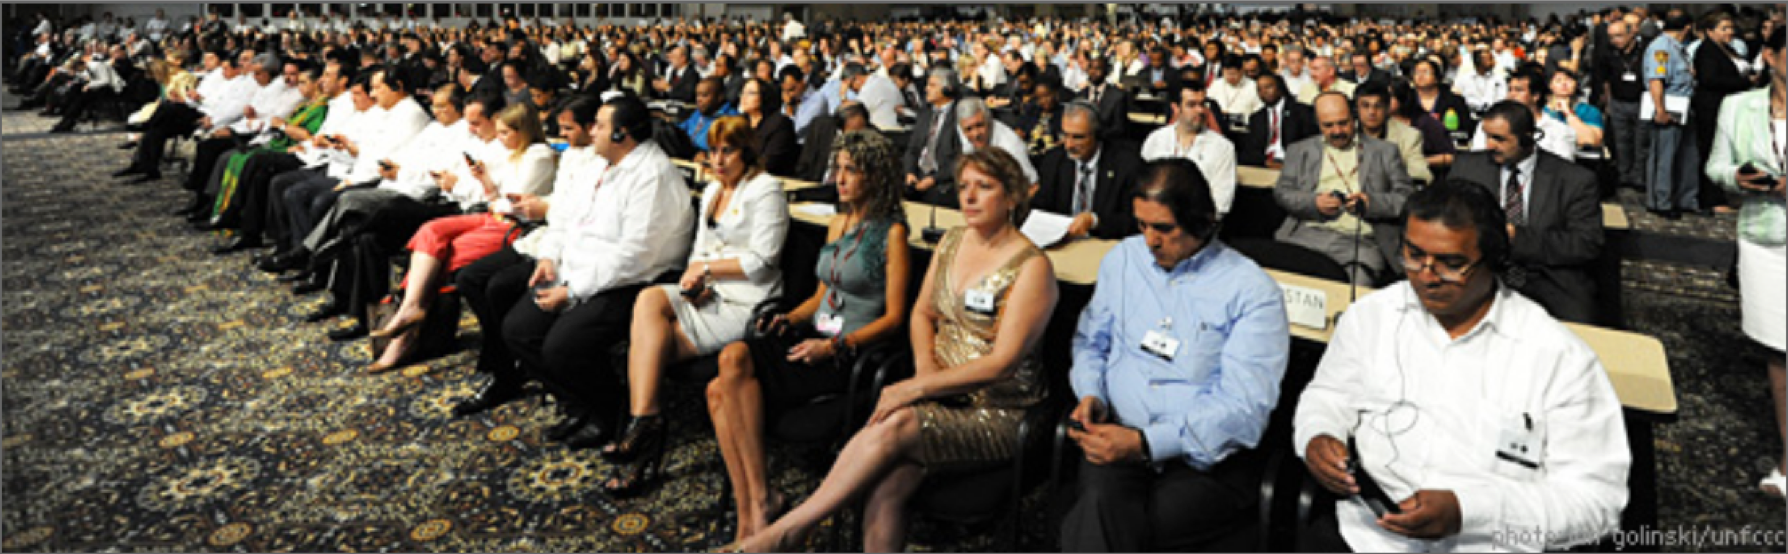 Image of distracted audience at UNFCCC meeting.